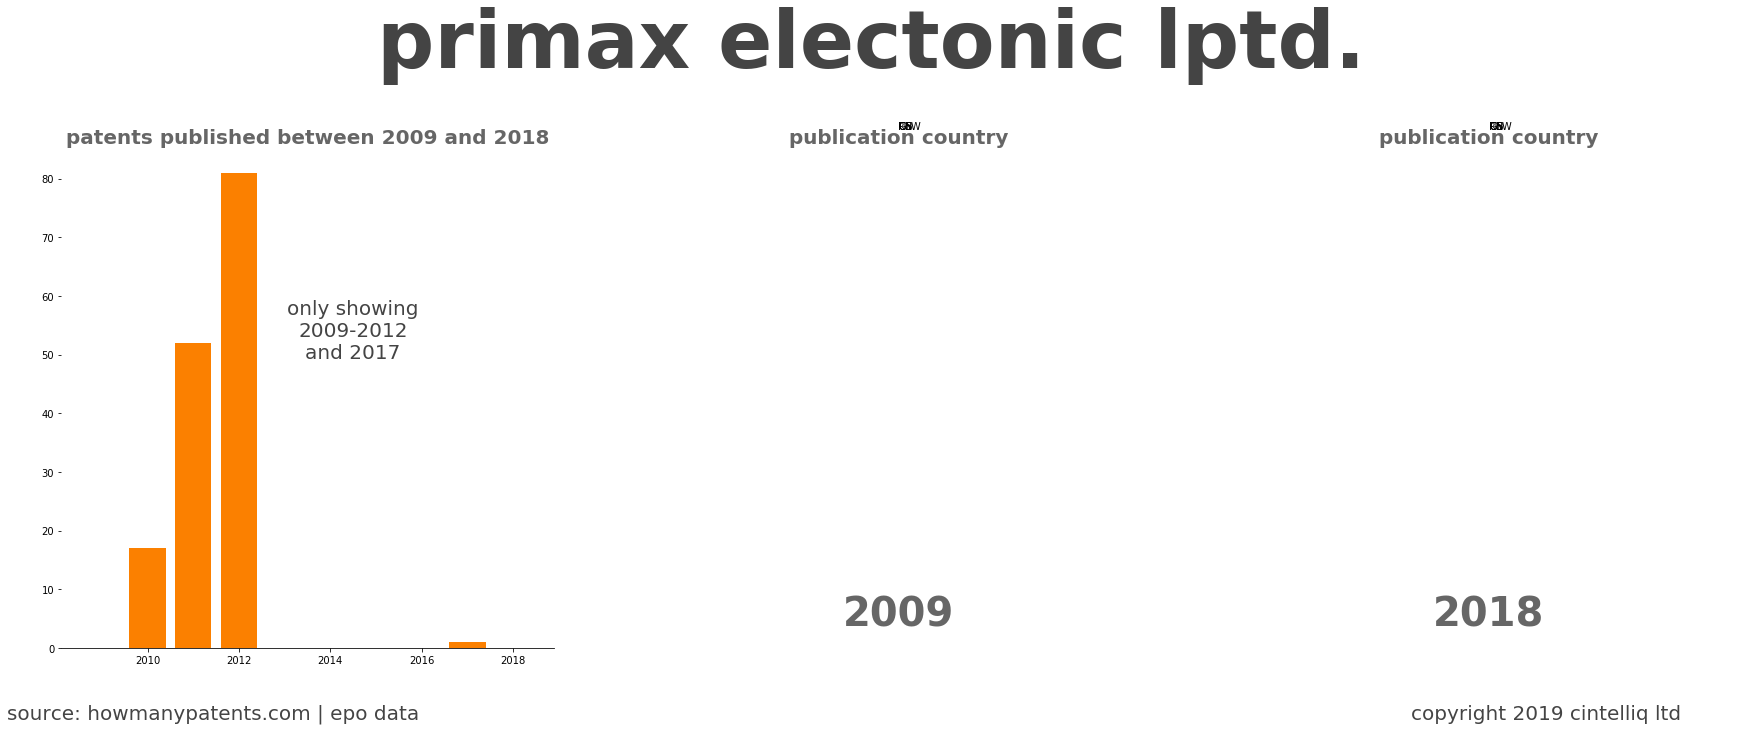 summary of patents for Primax Electonic Lptd.